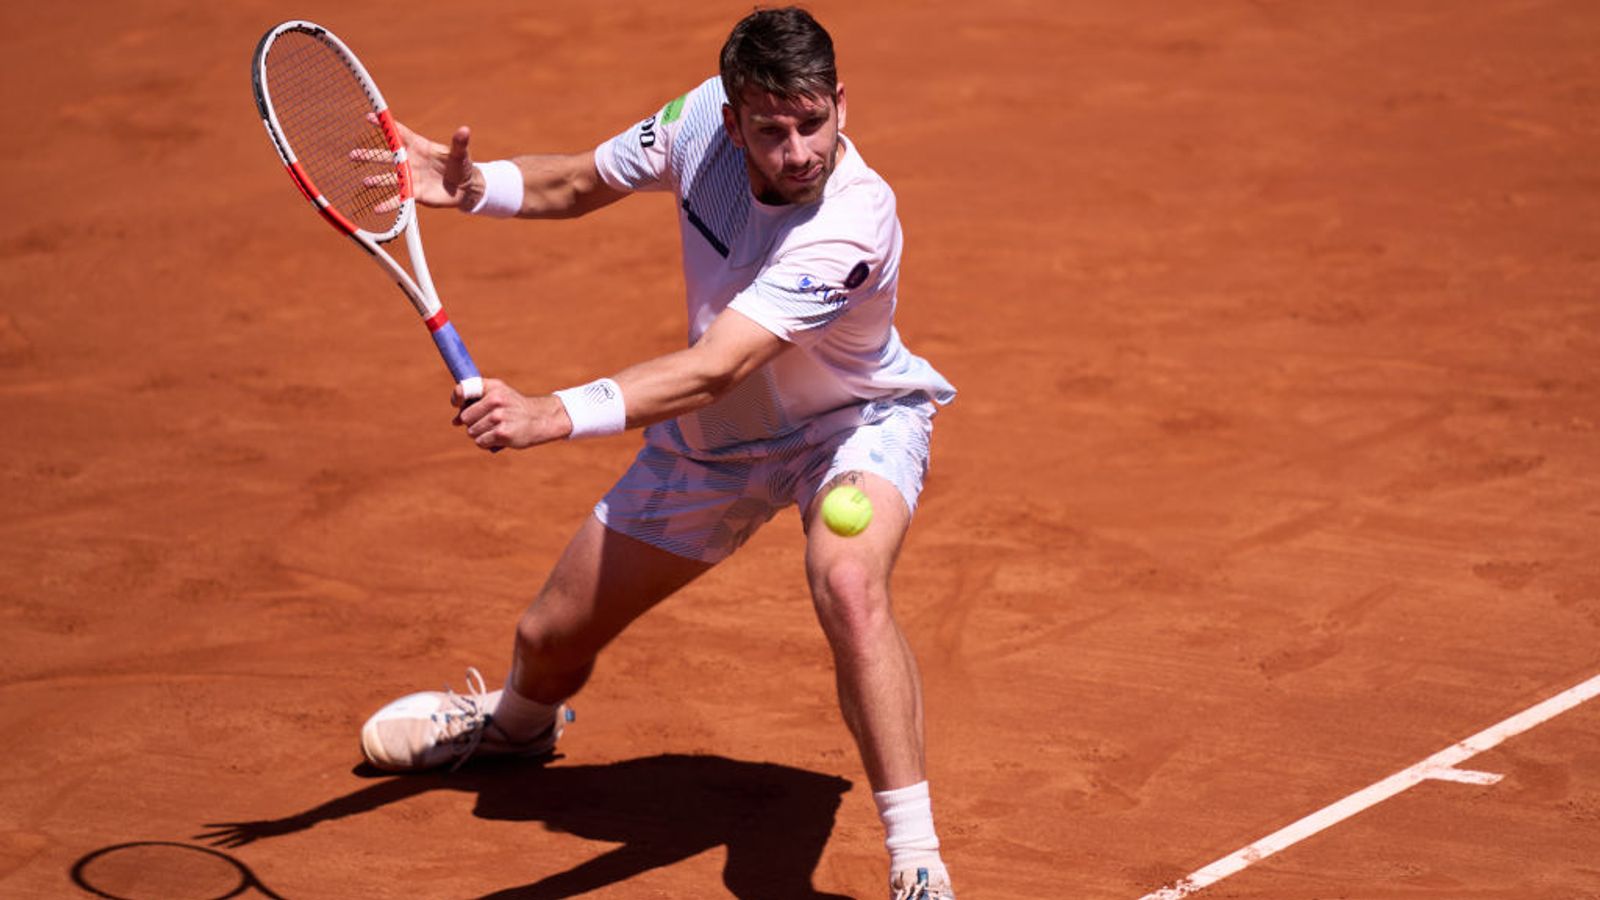 Italian Open LIVE! Norrie facing Tsitsipas for place in last 16